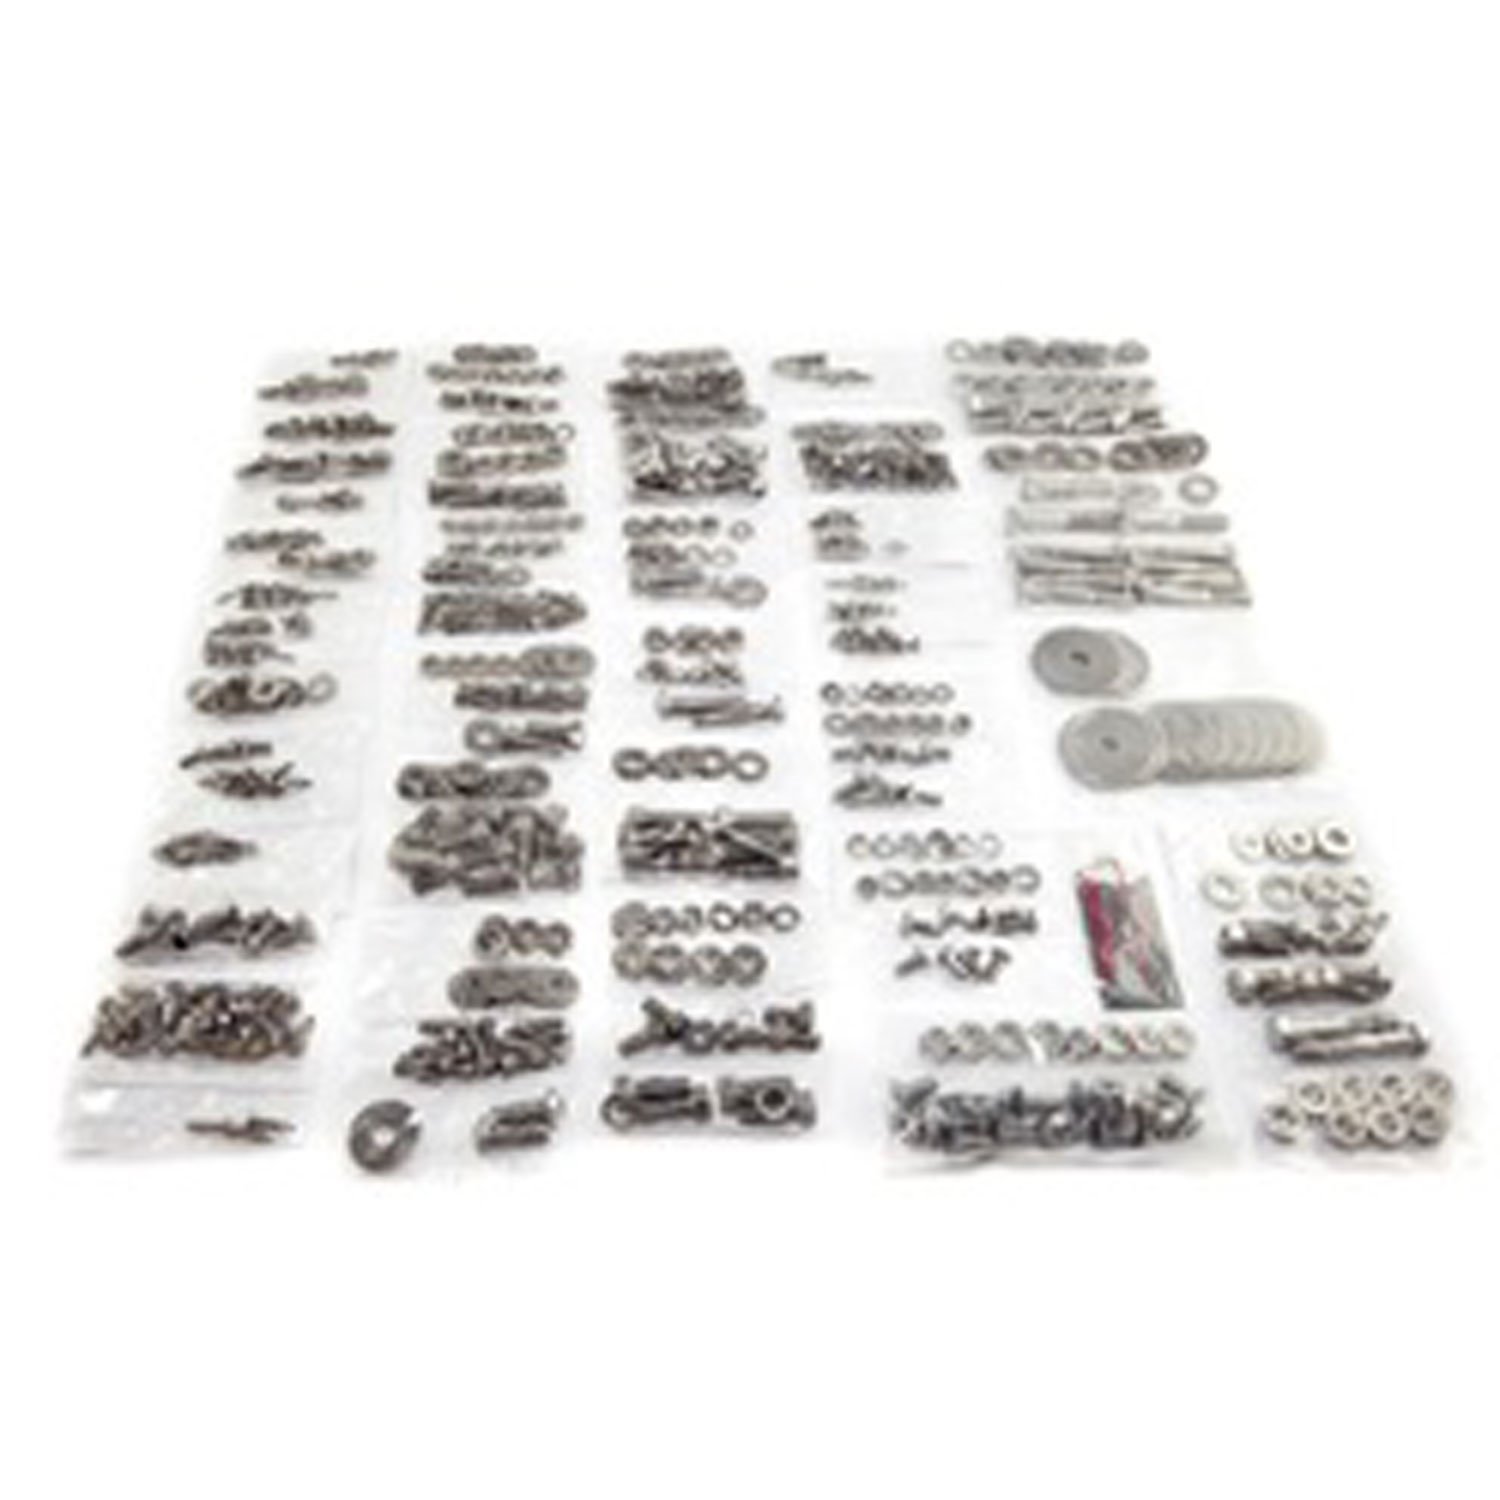 This 754 piece stainless steel body fastener kit